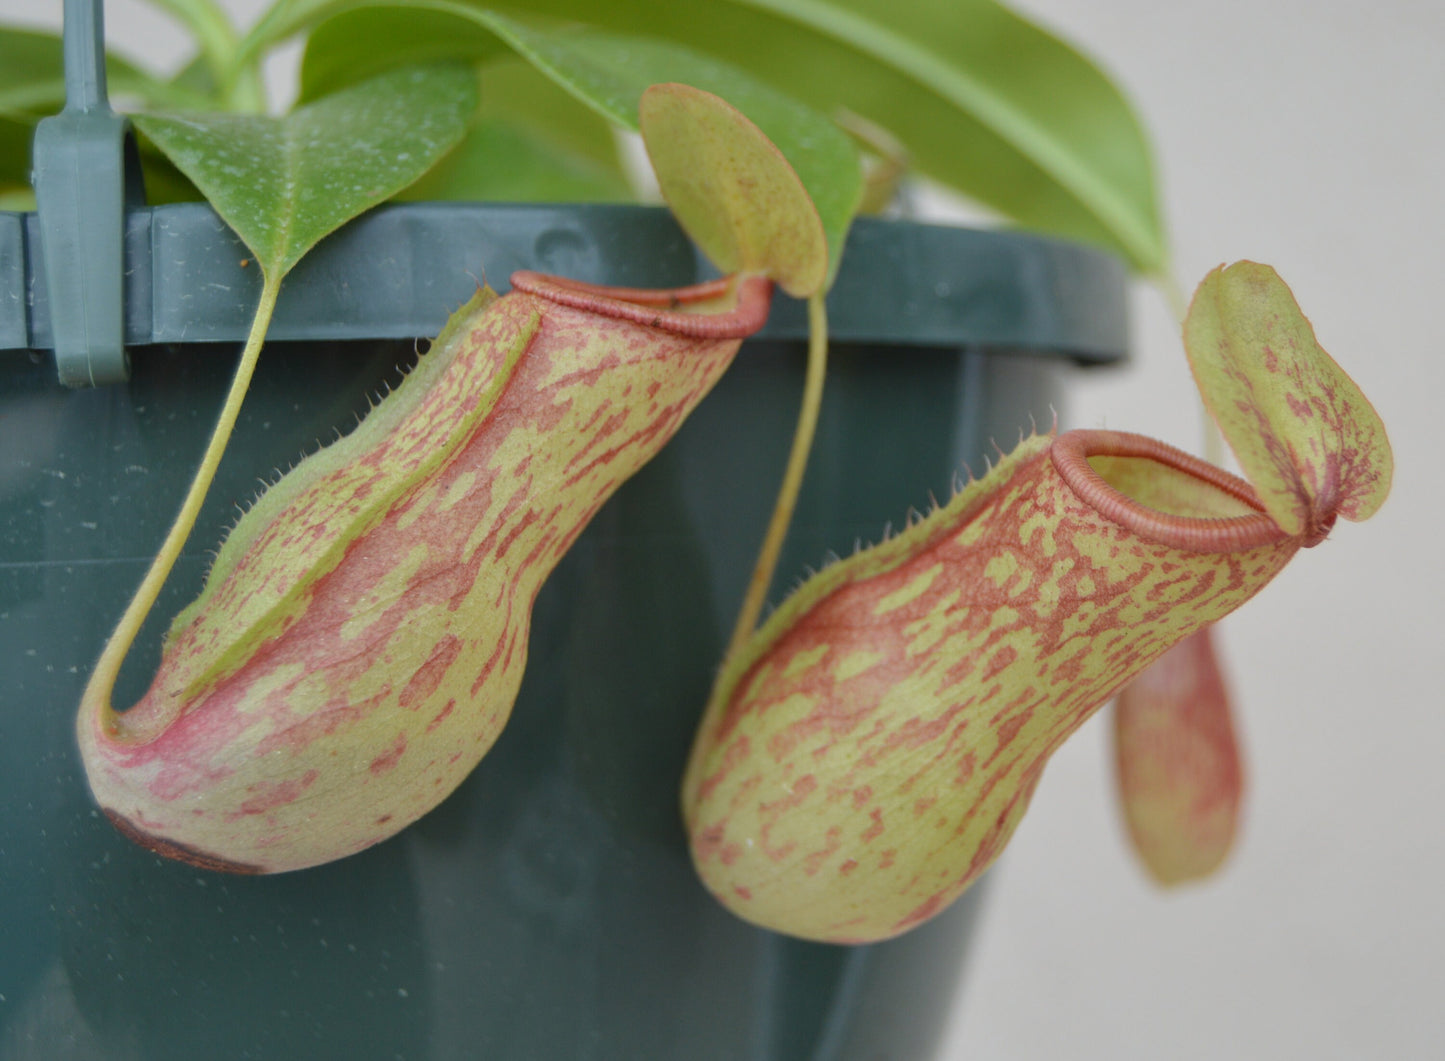 Nepenthes St. Gaya is a hybrid cross between khasiana x (ventricosa x maxima) Plants are at least 8 to 10 inches across with multiple pitchers and cherry red and green speckled coloration they are in 8 inch hanging baskets